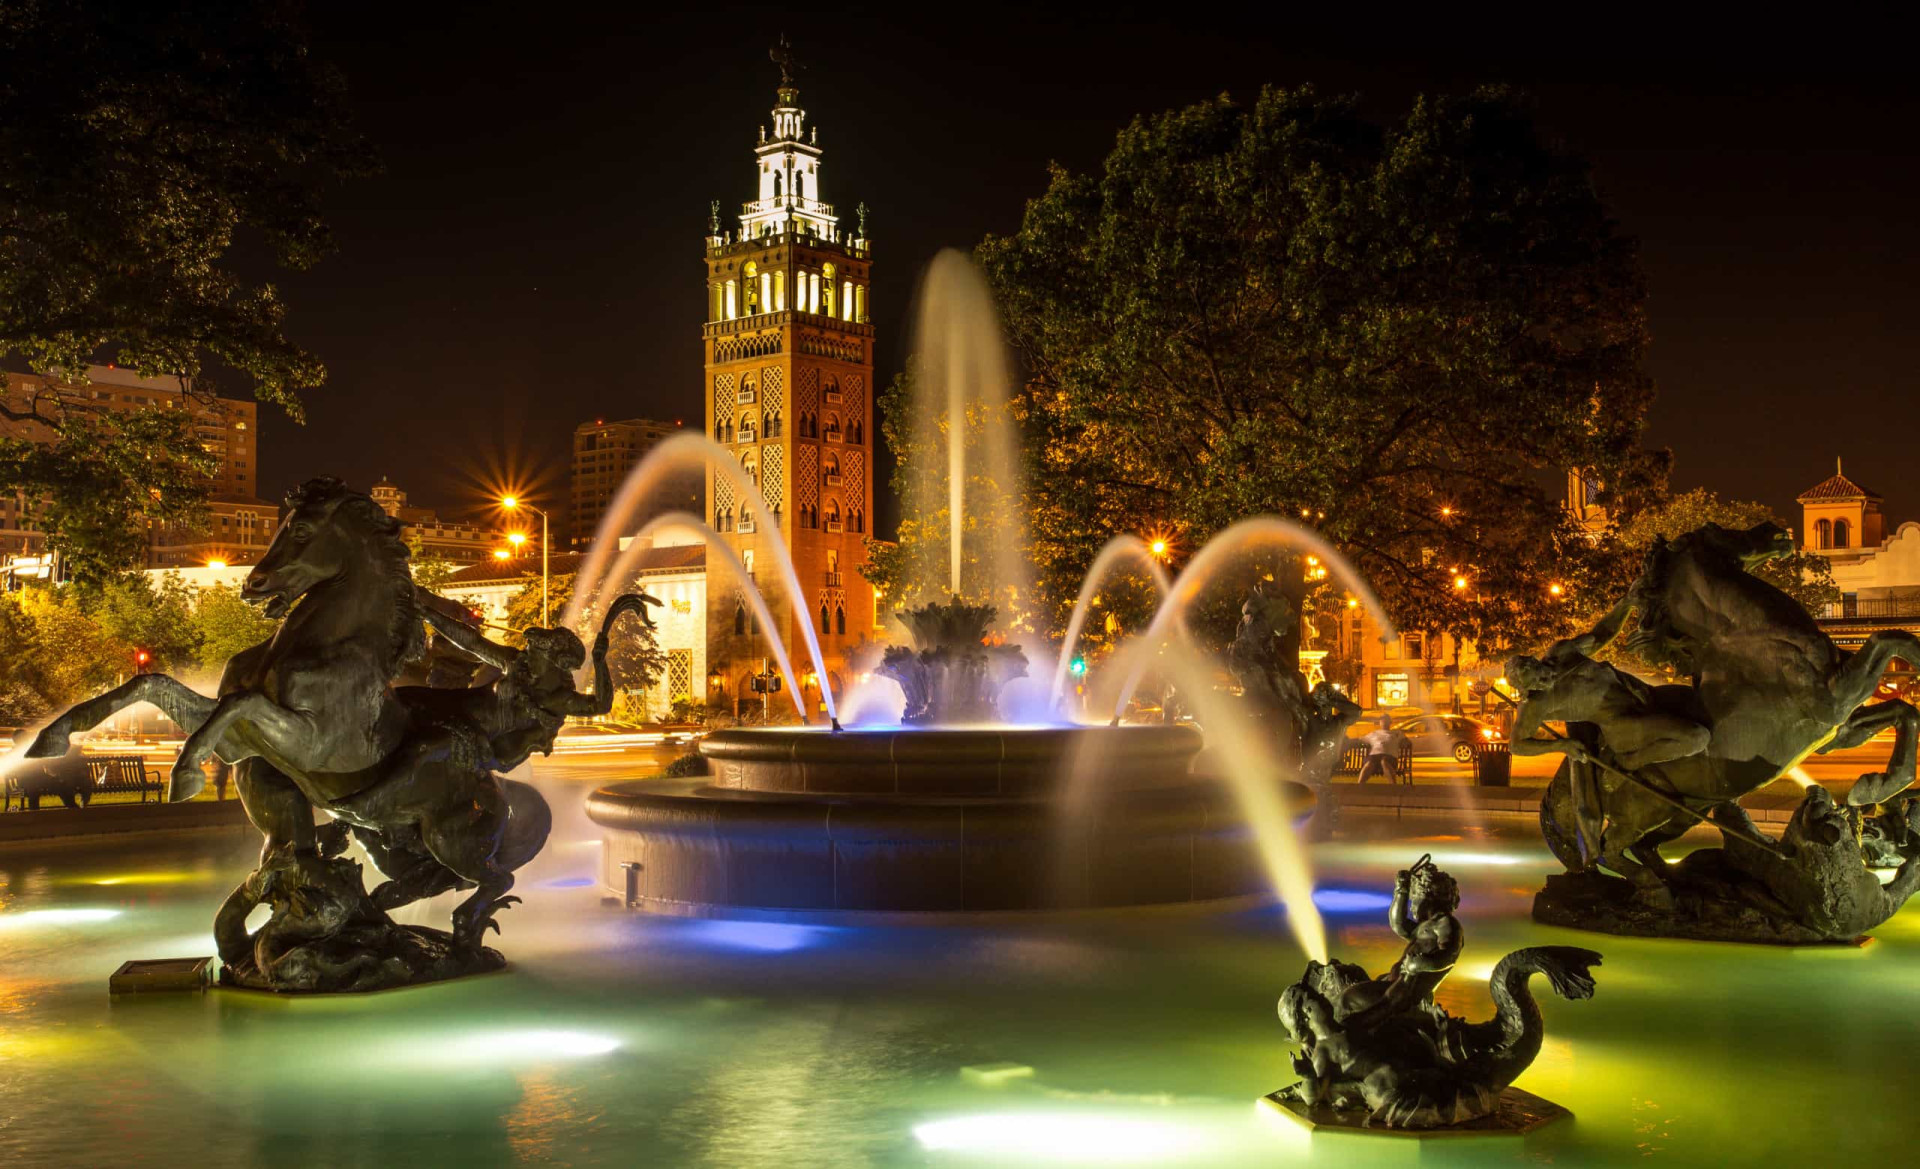 <p>Reminiscent of a Spanish town square, Country Club Plaza takes inspiration from Kansas City's sister city of Seville. Visitors can take in ornate fountains and European-style architecture, while shopping at chic boutiques and dining at romantic restaurants on the flagstones.</p><p>You may also like:<a href="https://www.starsinsider.com/n/493697?utm_source=msn.com&utm_medium=display&utm_campaign=referral_description&utm_content=486112v1en-us"> Exploring the Skeleton Coast, the "land God made in anger"</a></p>